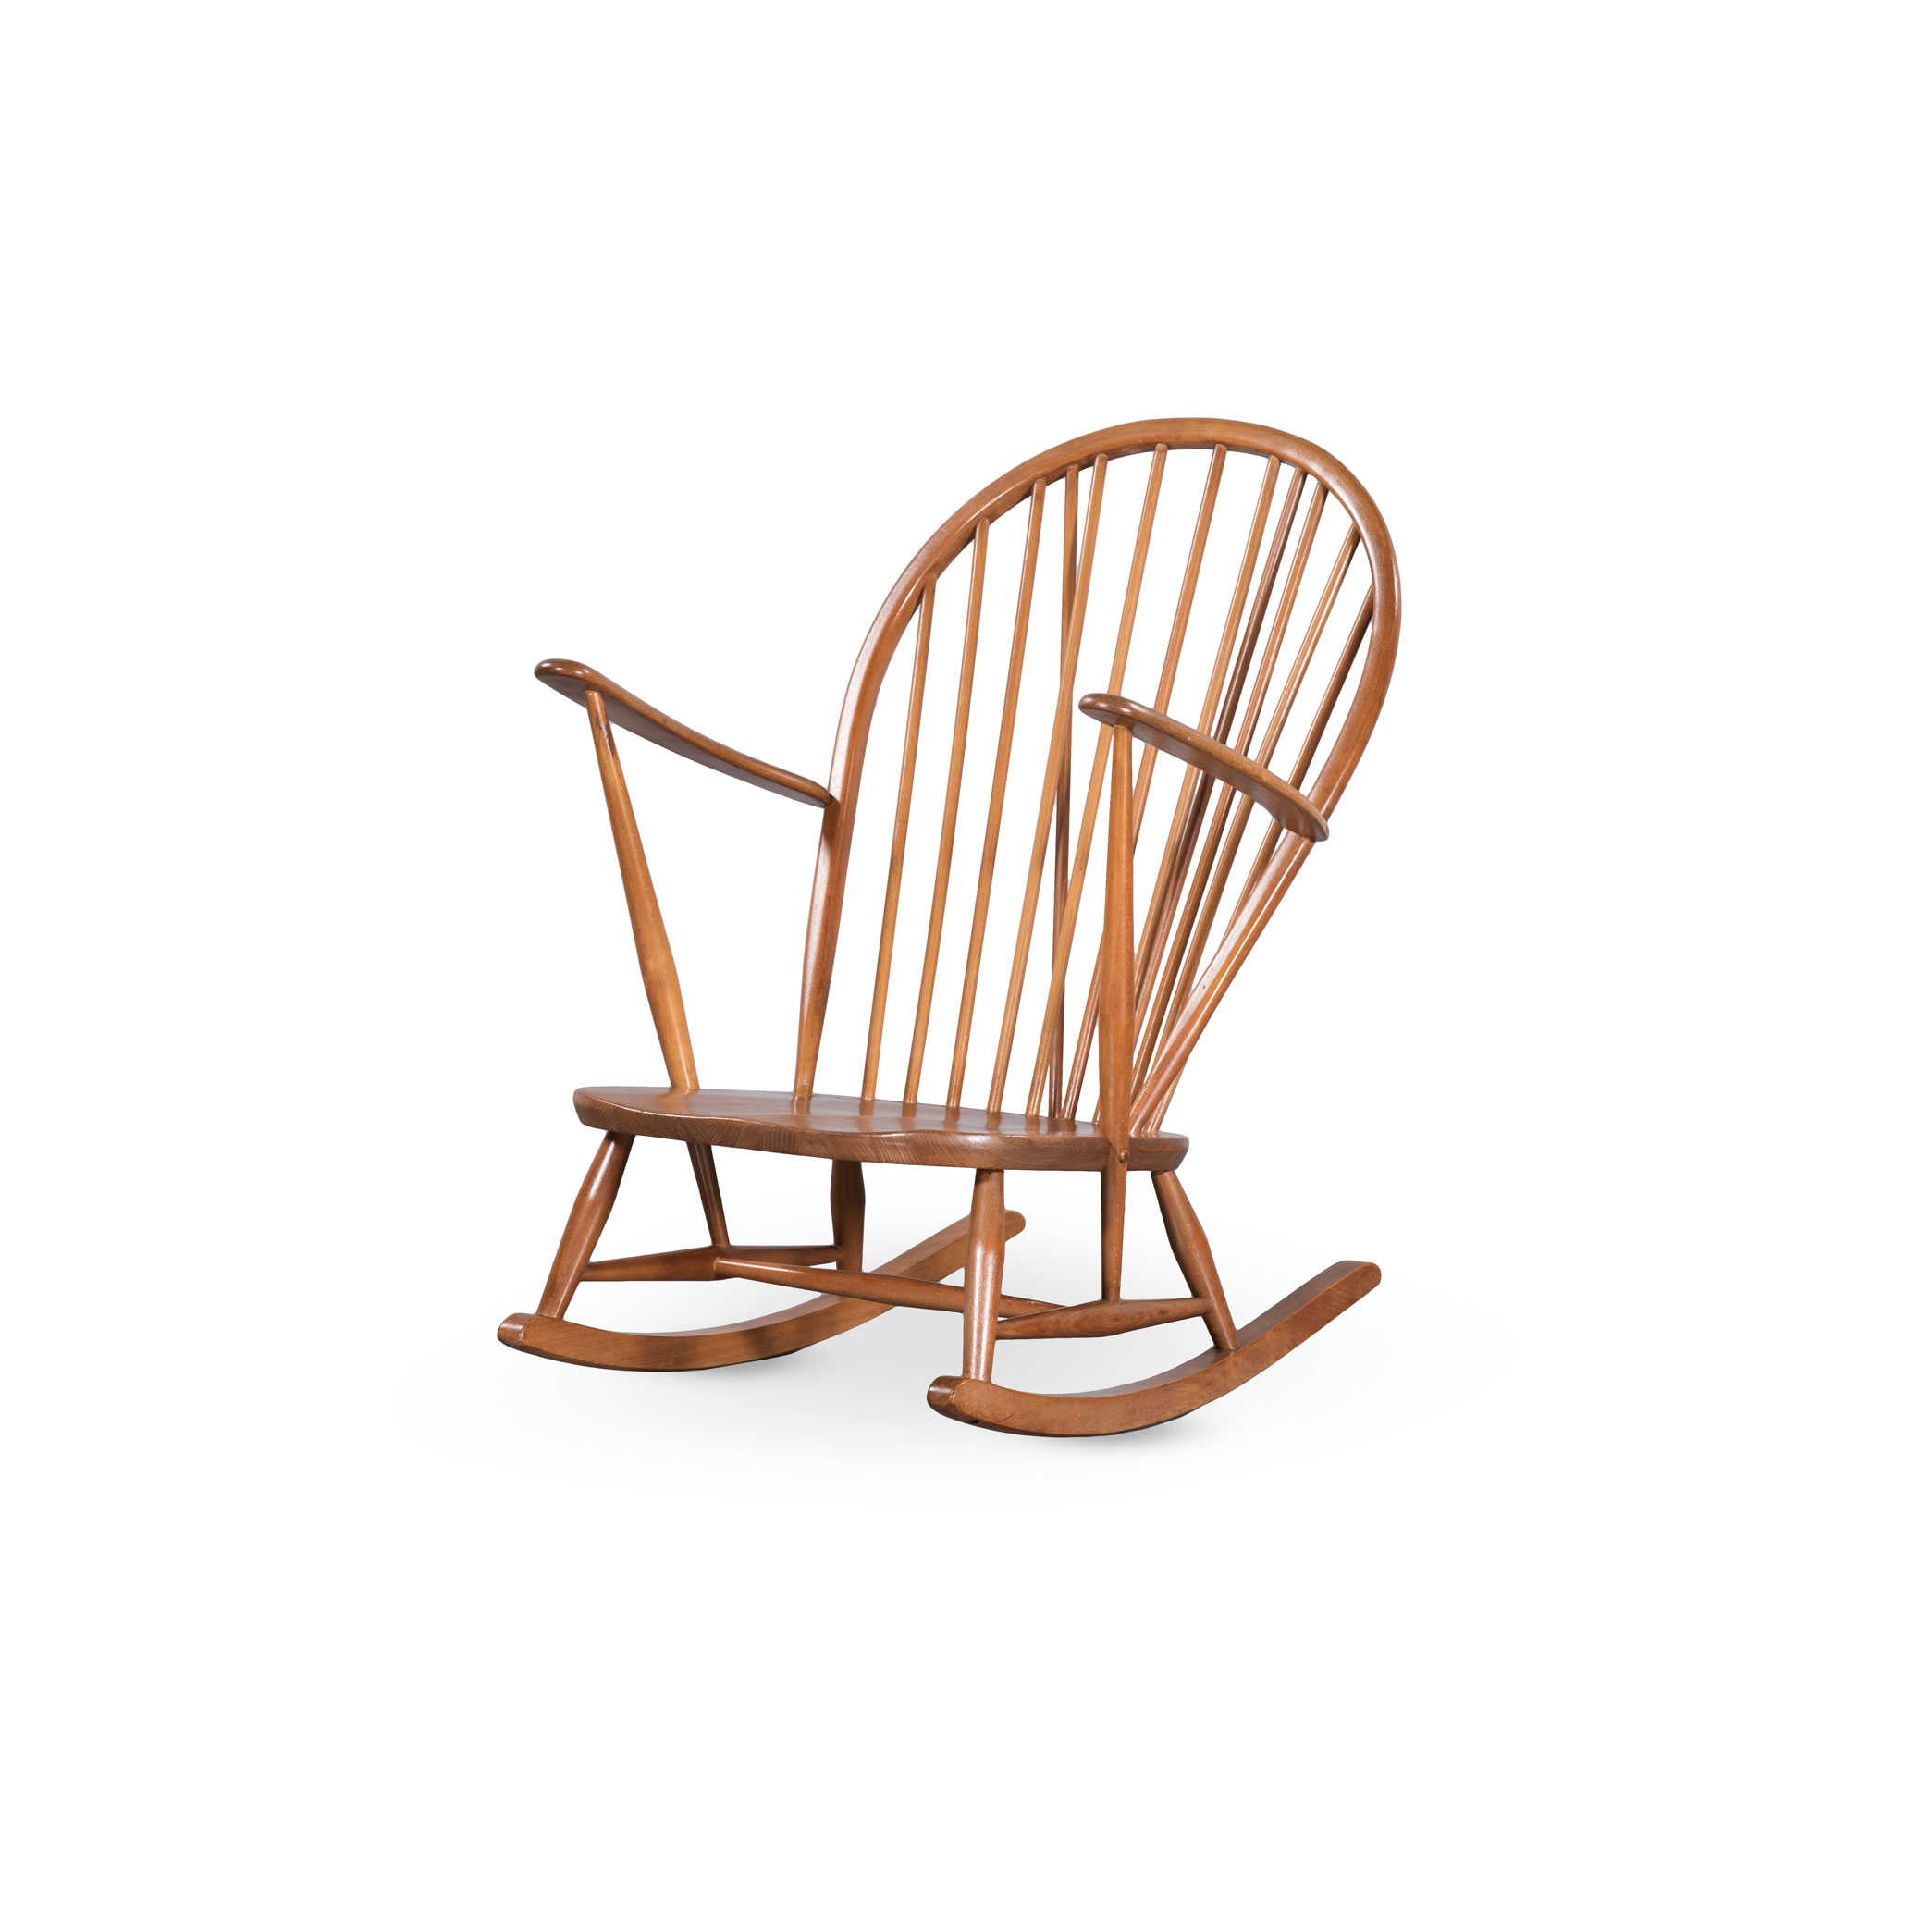 AN ELM PEACOCK BACK ROCKING CHAIR MANUFACTURED BY ERCOL